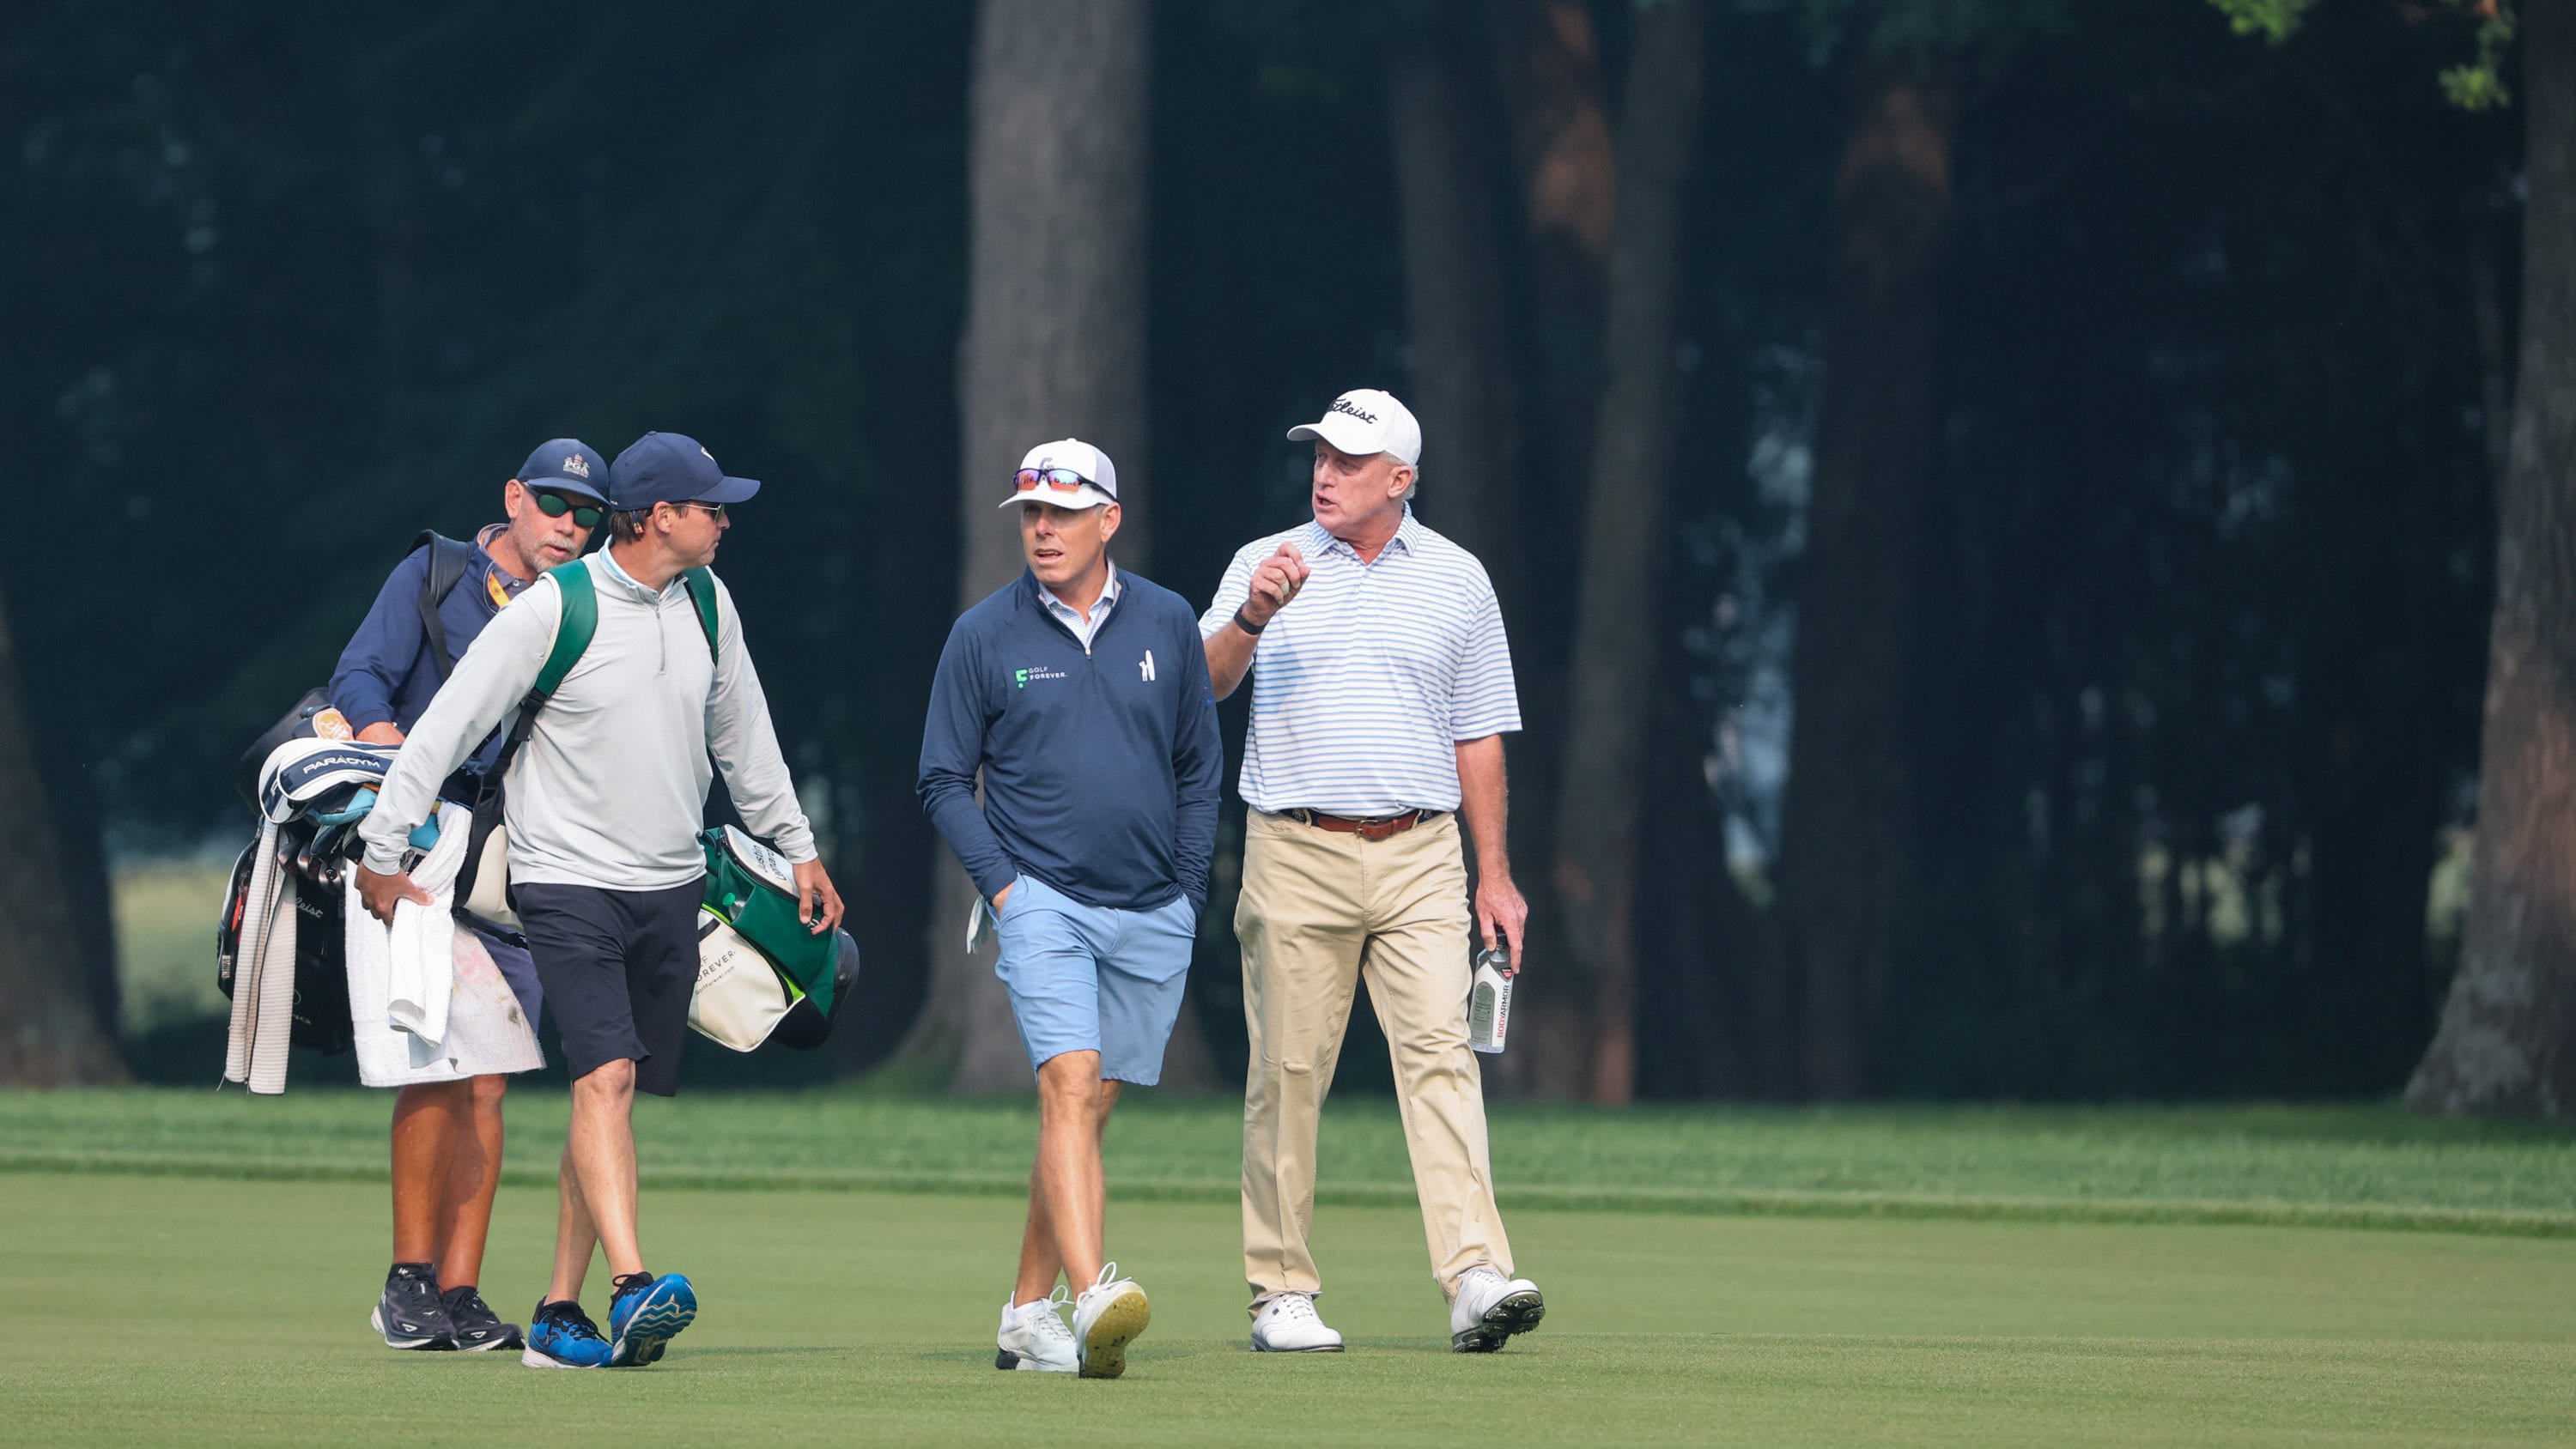 12-time PGA Tour winner Justin Leonard (center) is slowly finding his comfort zone in his return to competitive golf on the 50-and-over circuit. (USGA/Jeff Haynes)